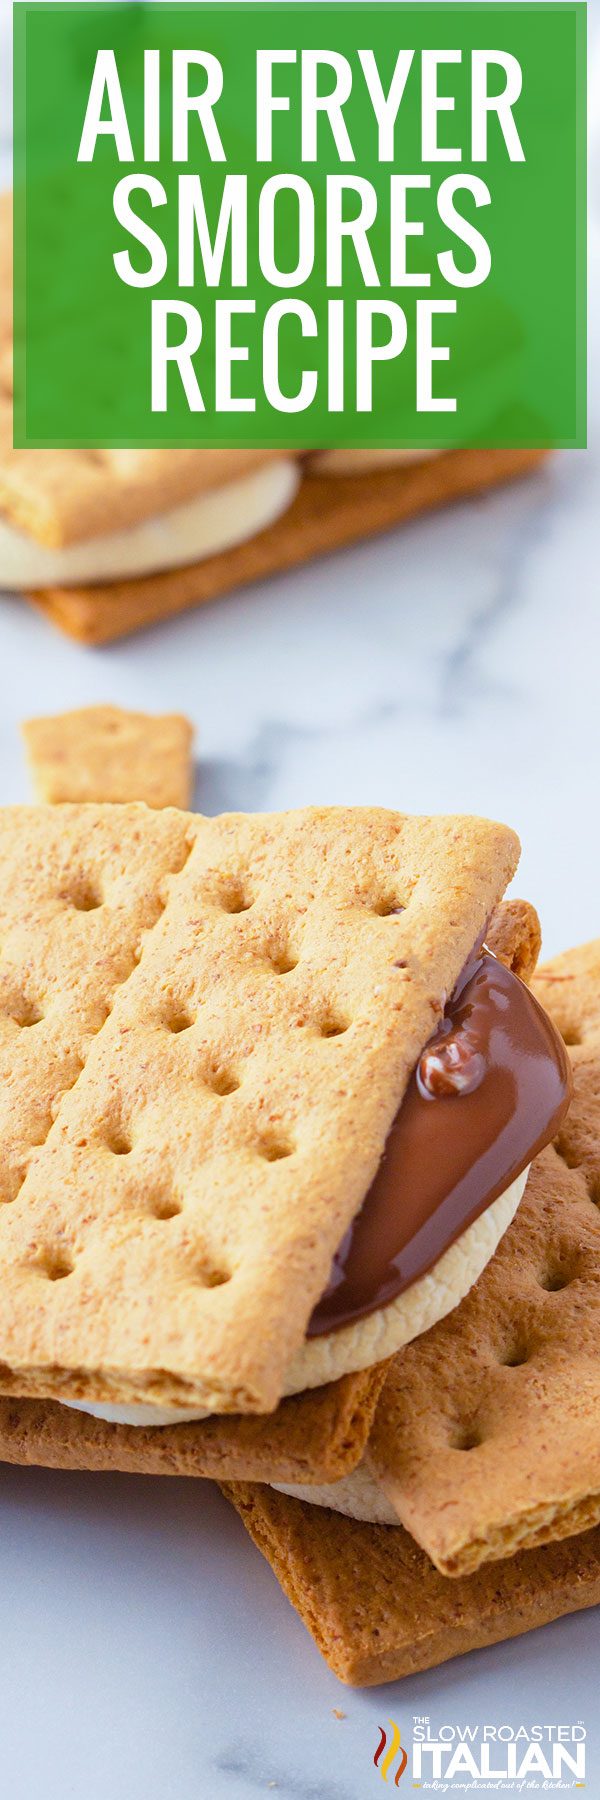 titled image for air fryer smores recipe